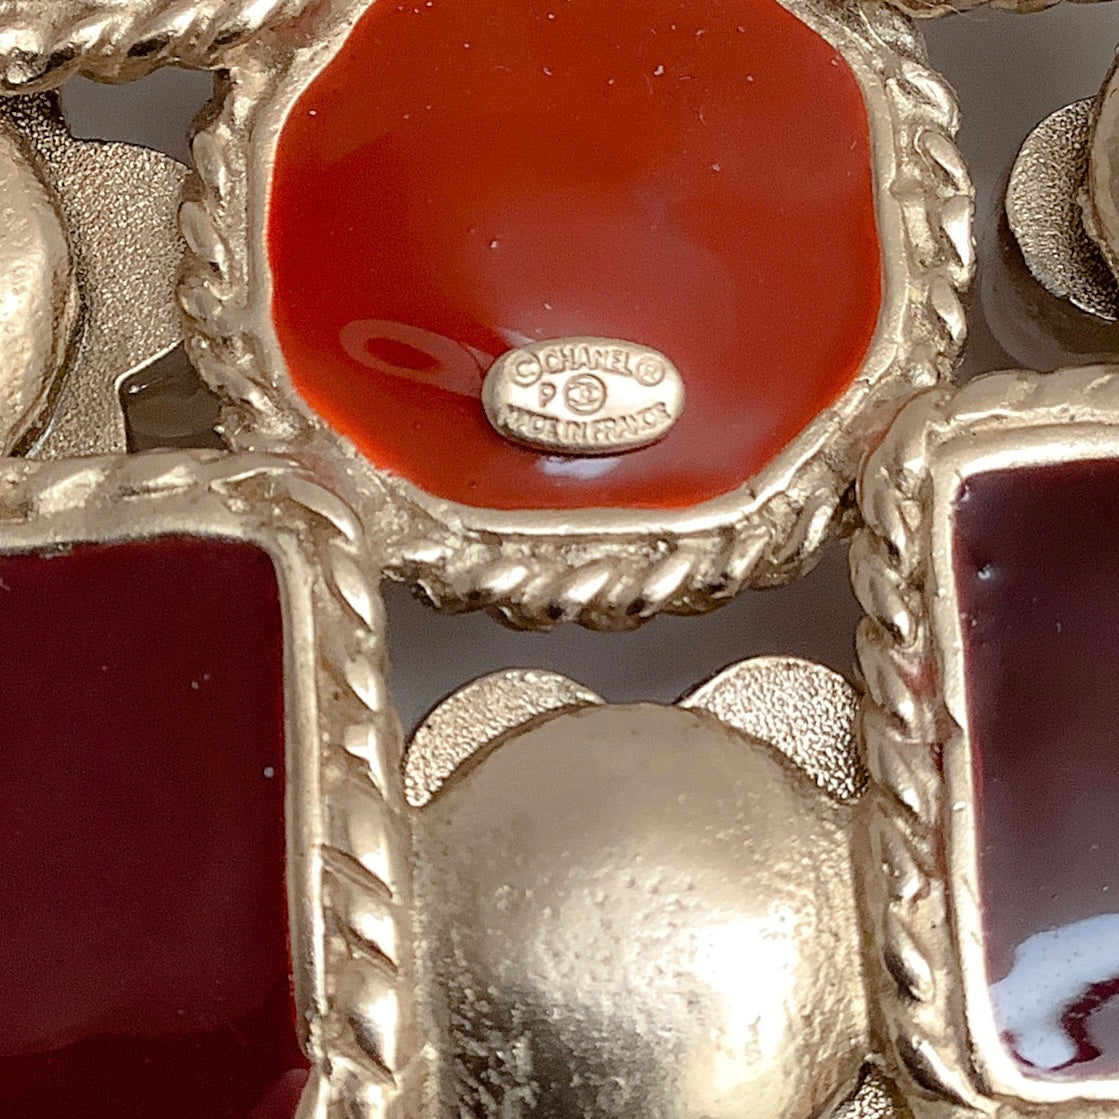 Chanel Burgundy Gripoix and Pearl Square Brooch